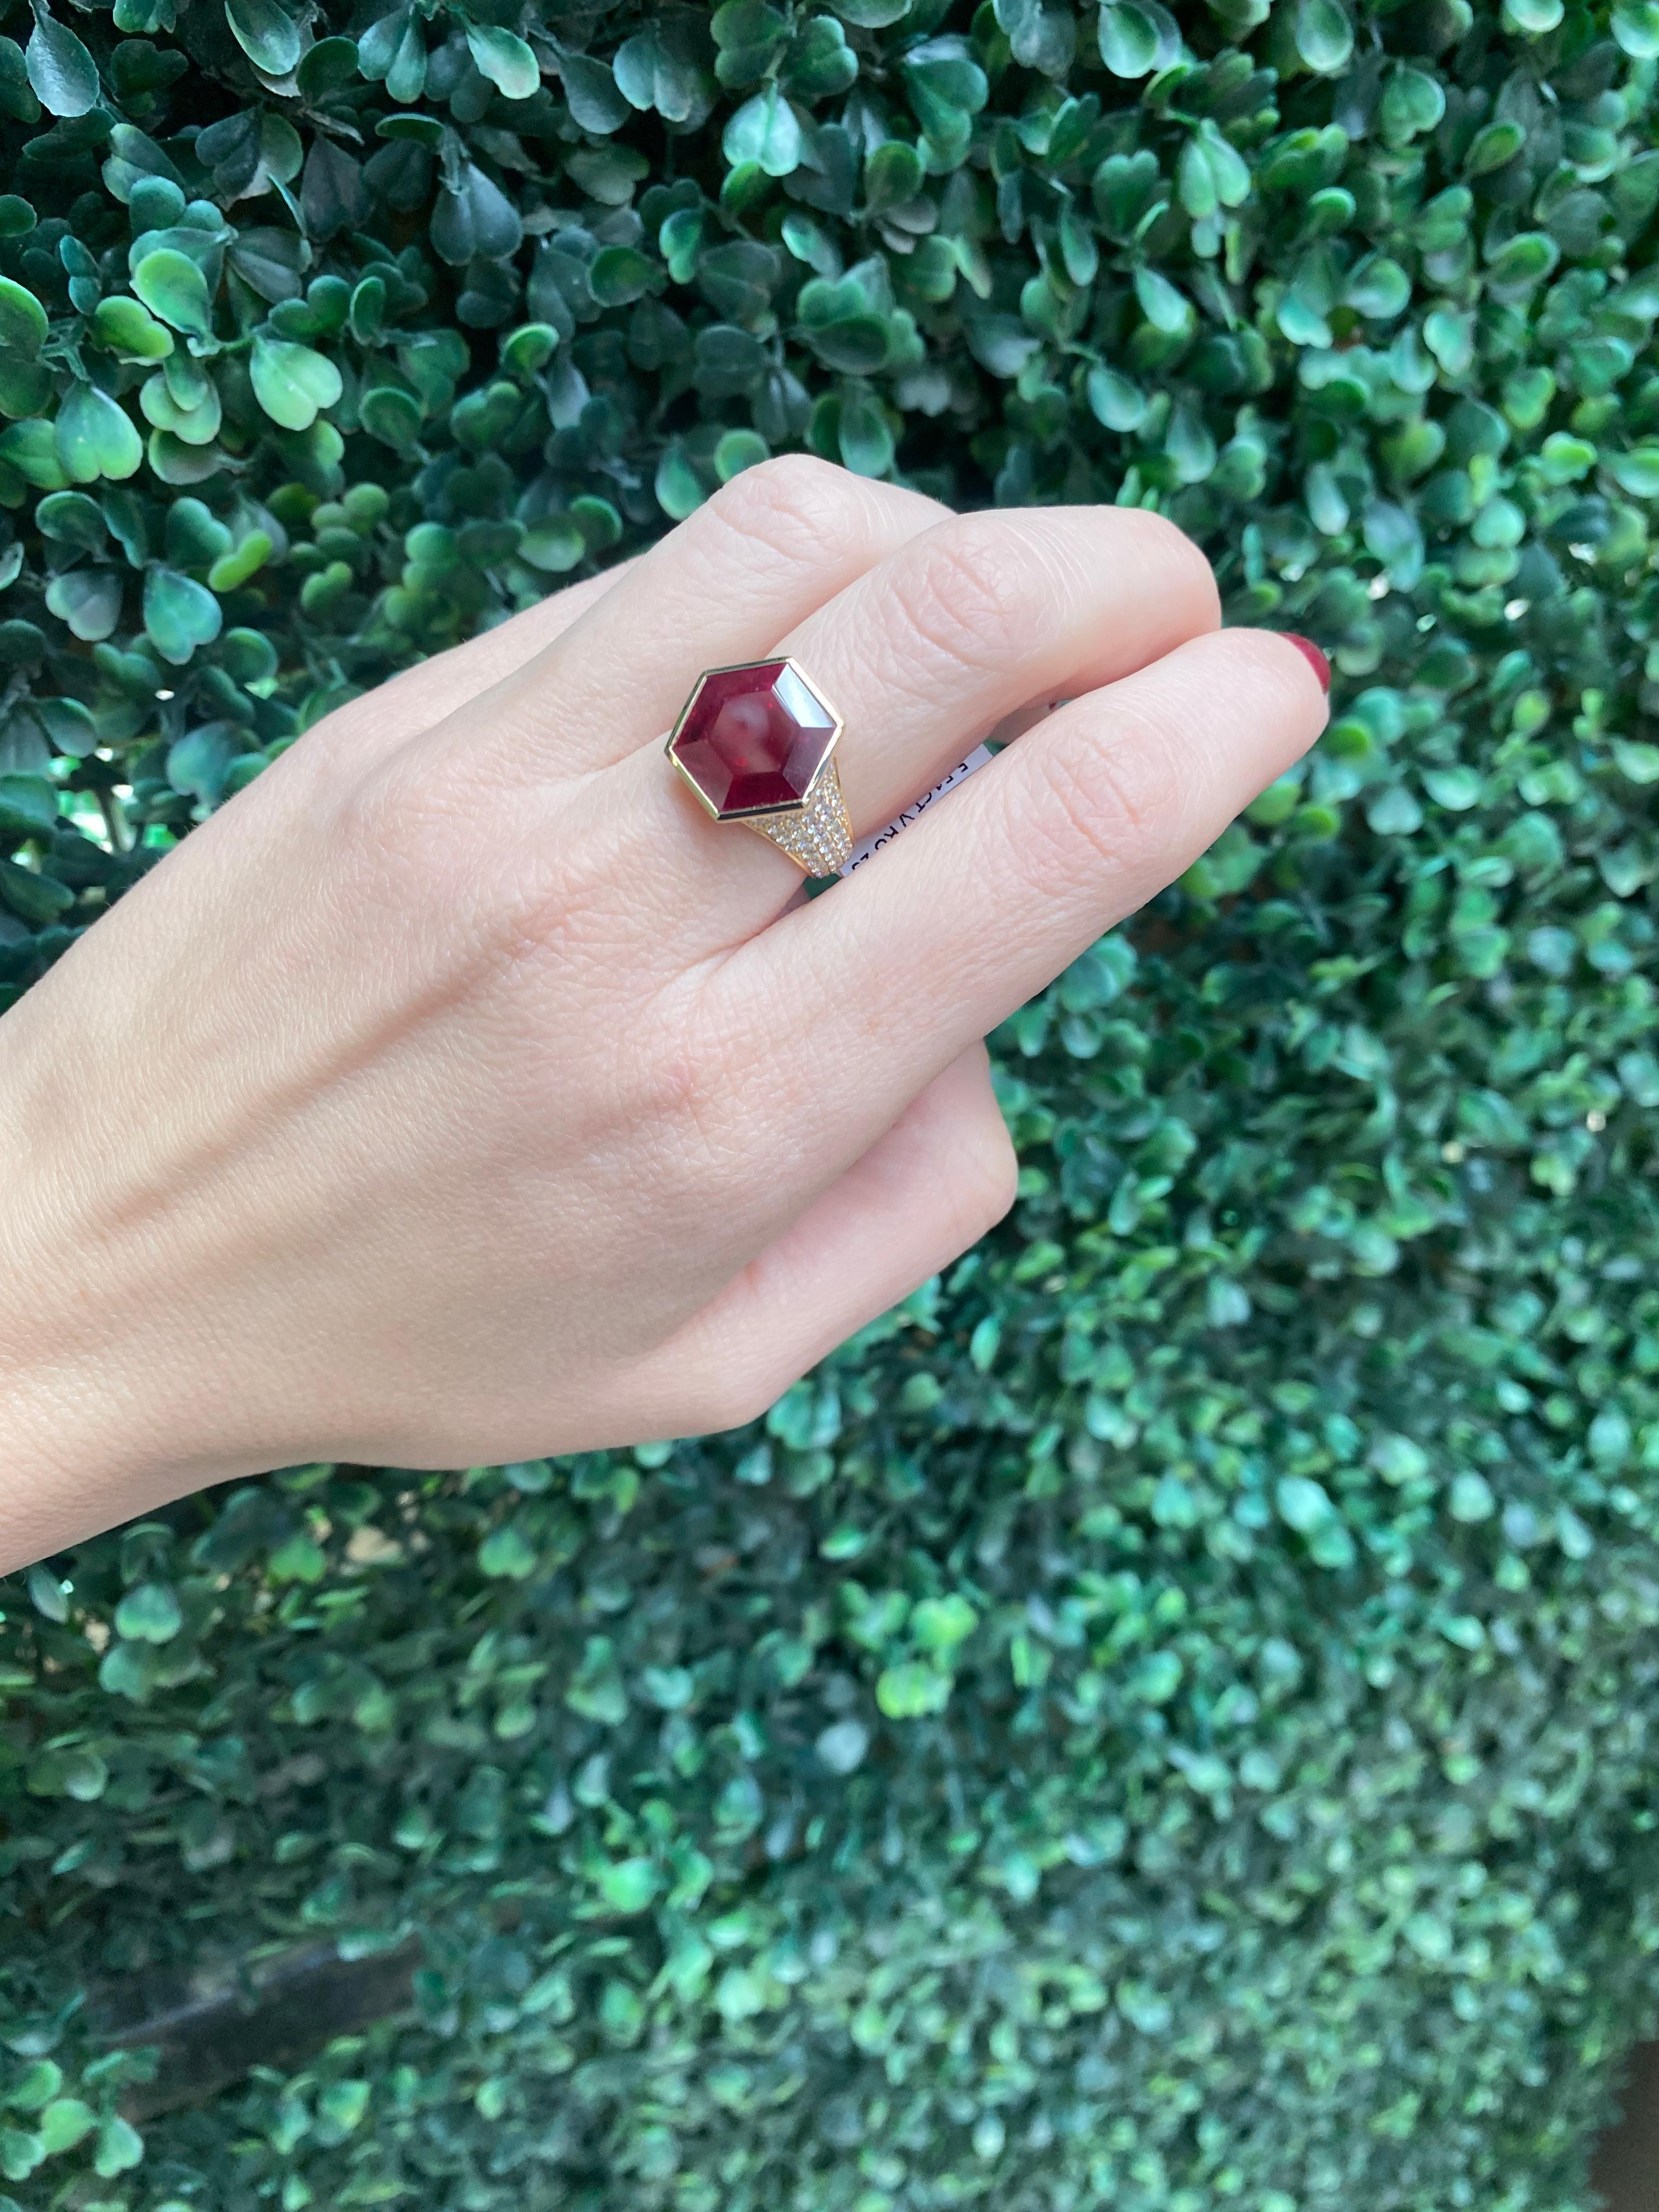 GIA Certified 5.51ct Hexagonal Cut Mozambique Ruby 18k Cocktail Ring For Sale 1